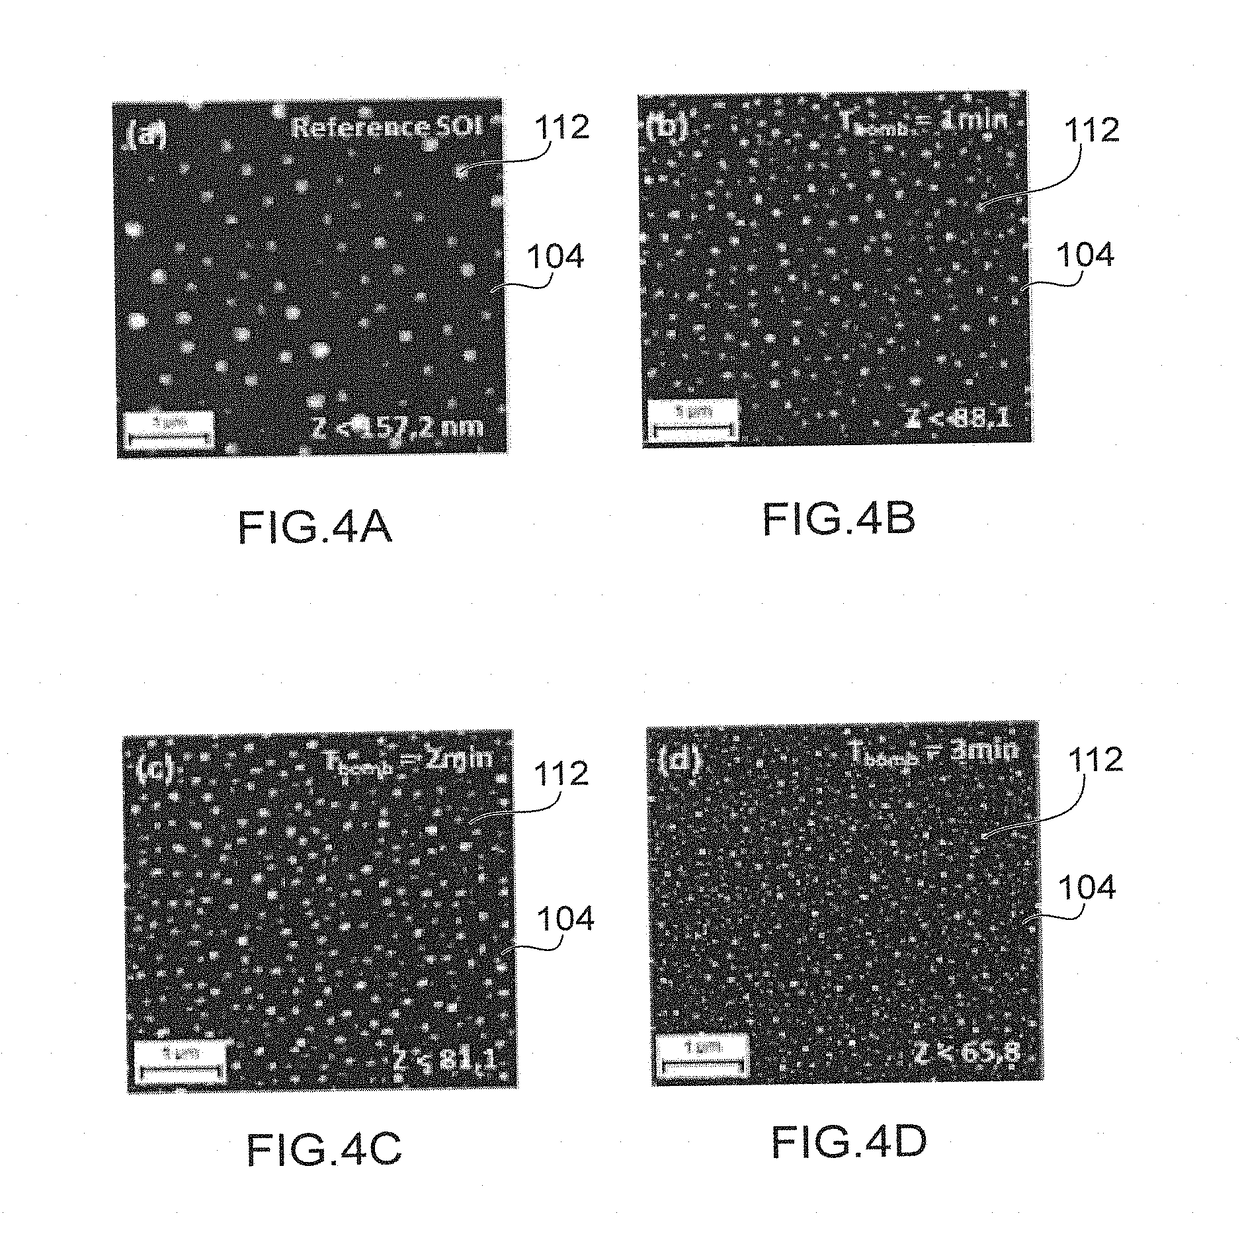 Method for producing nanocrystals with controlled dimensions and density